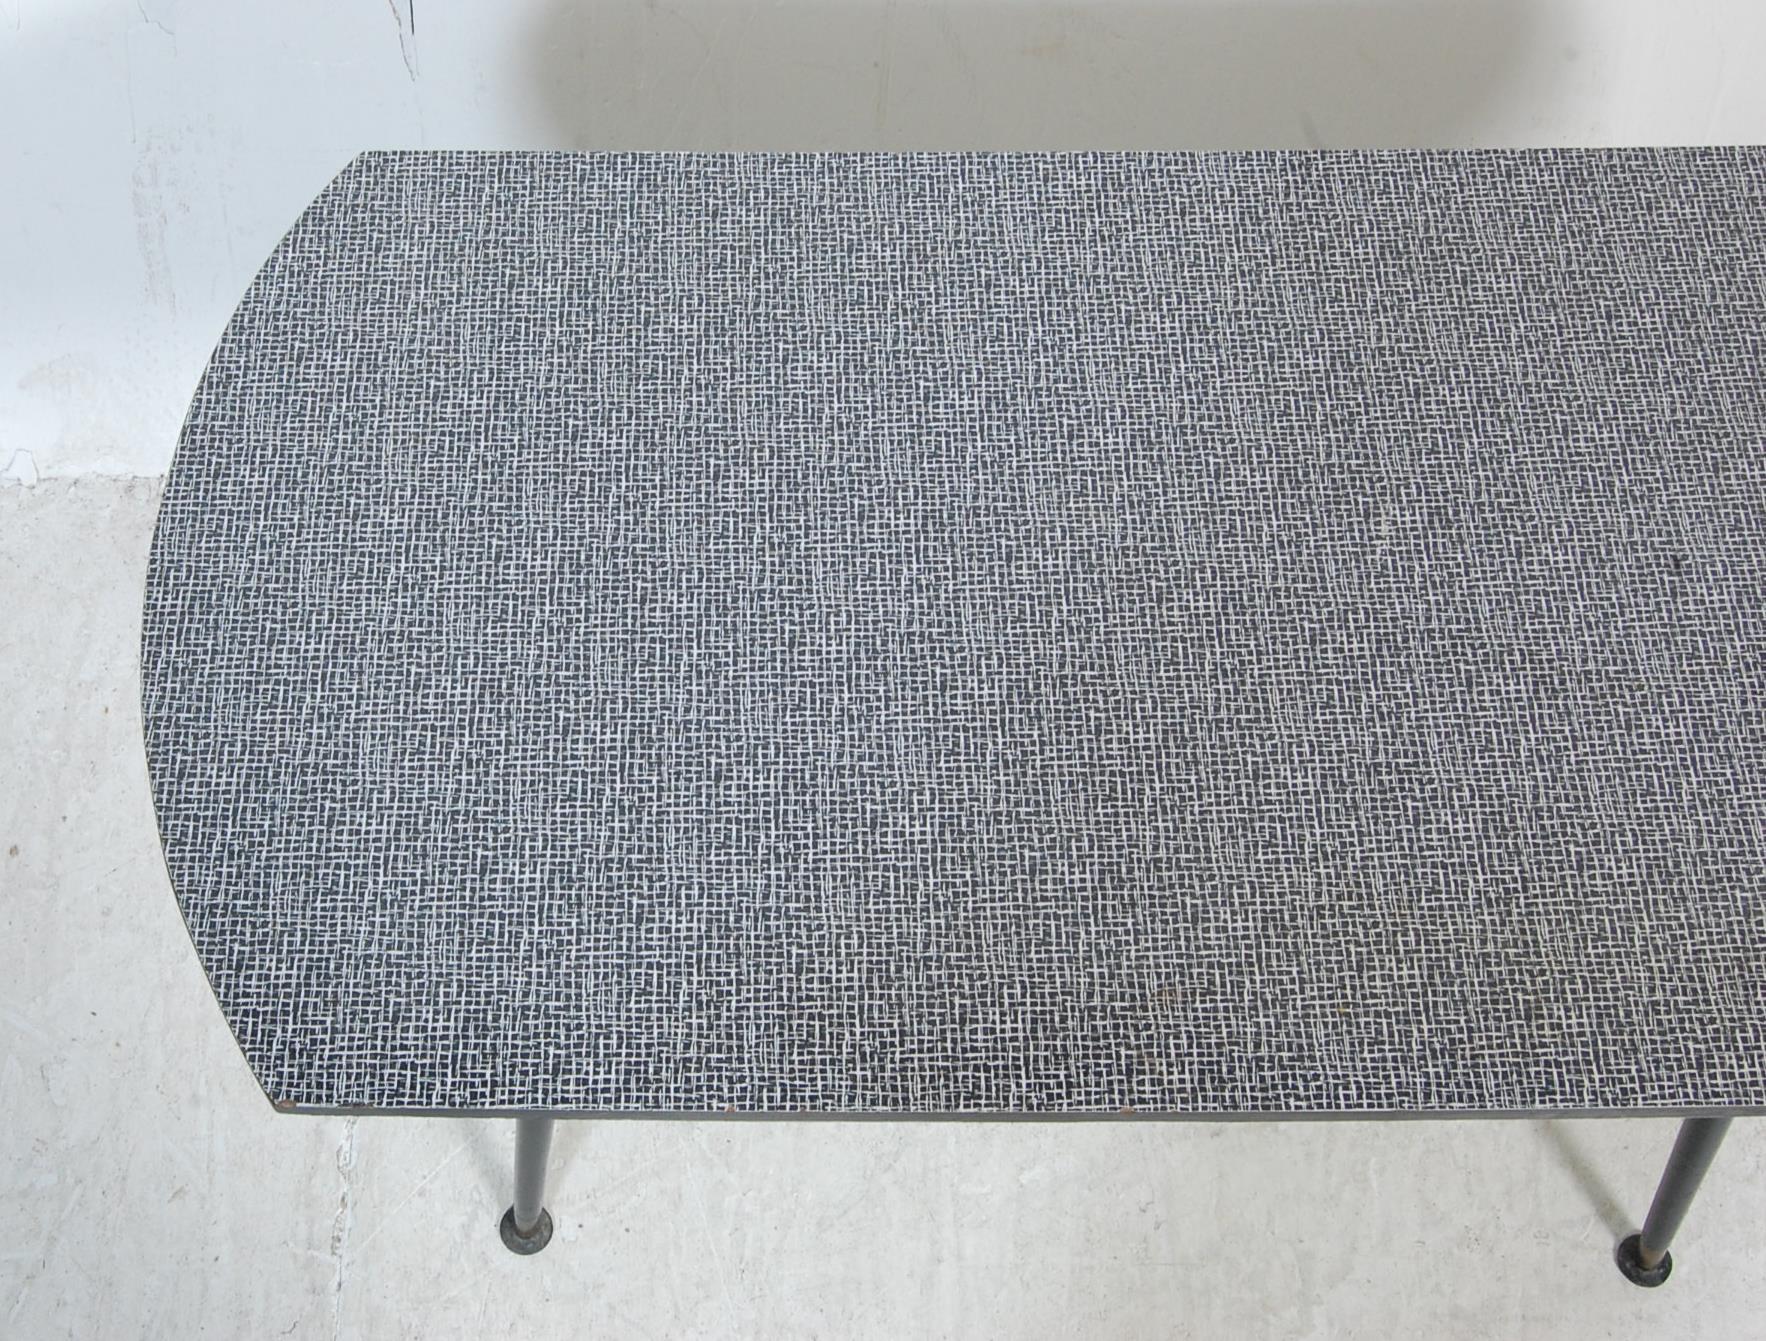 MID 20TH CENTURY FORMICA TOP COFFEE TABLE - Image 2 of 5